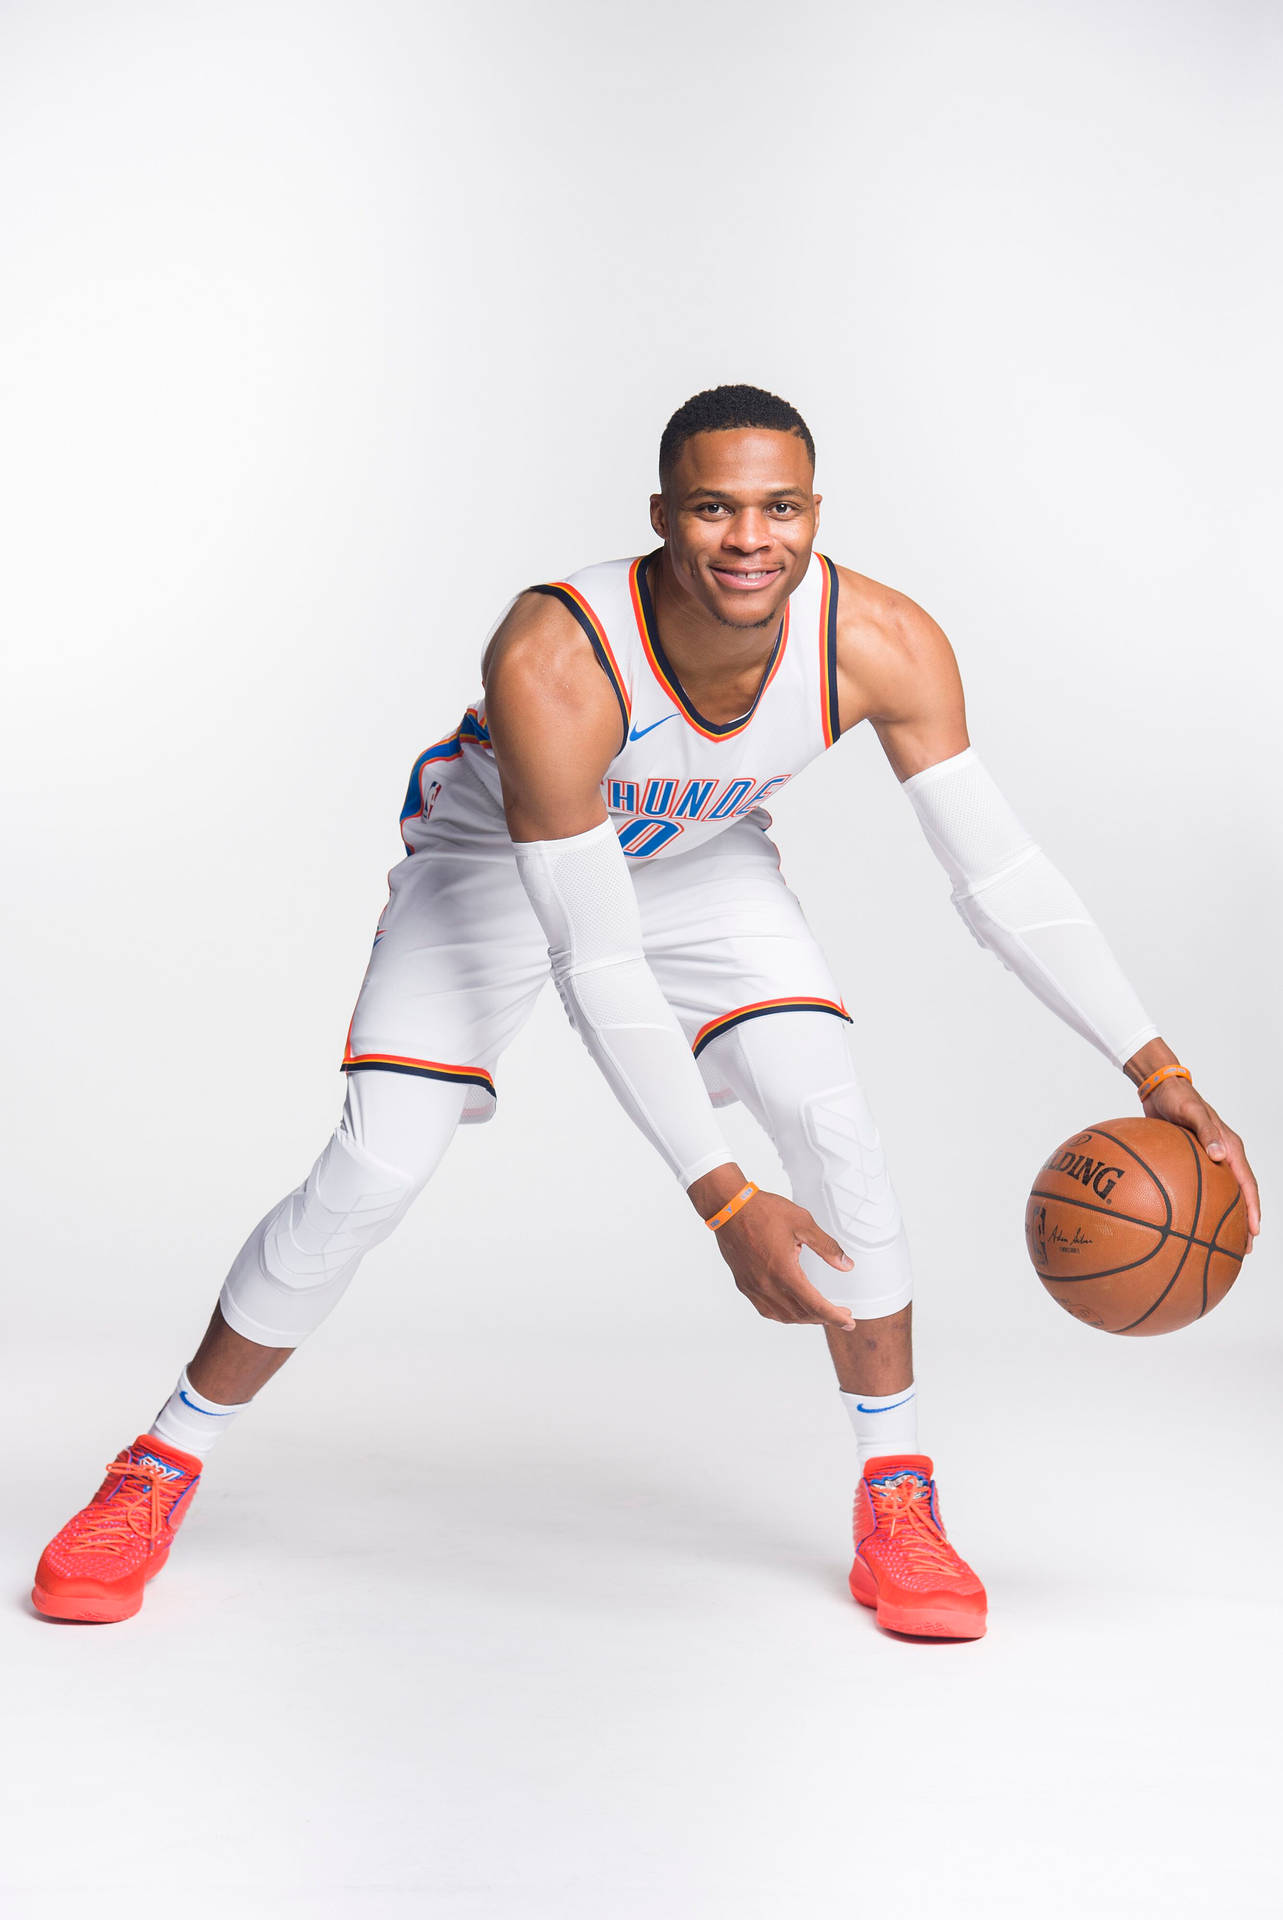 Russell Westbrook Dribbling Ball Portrait